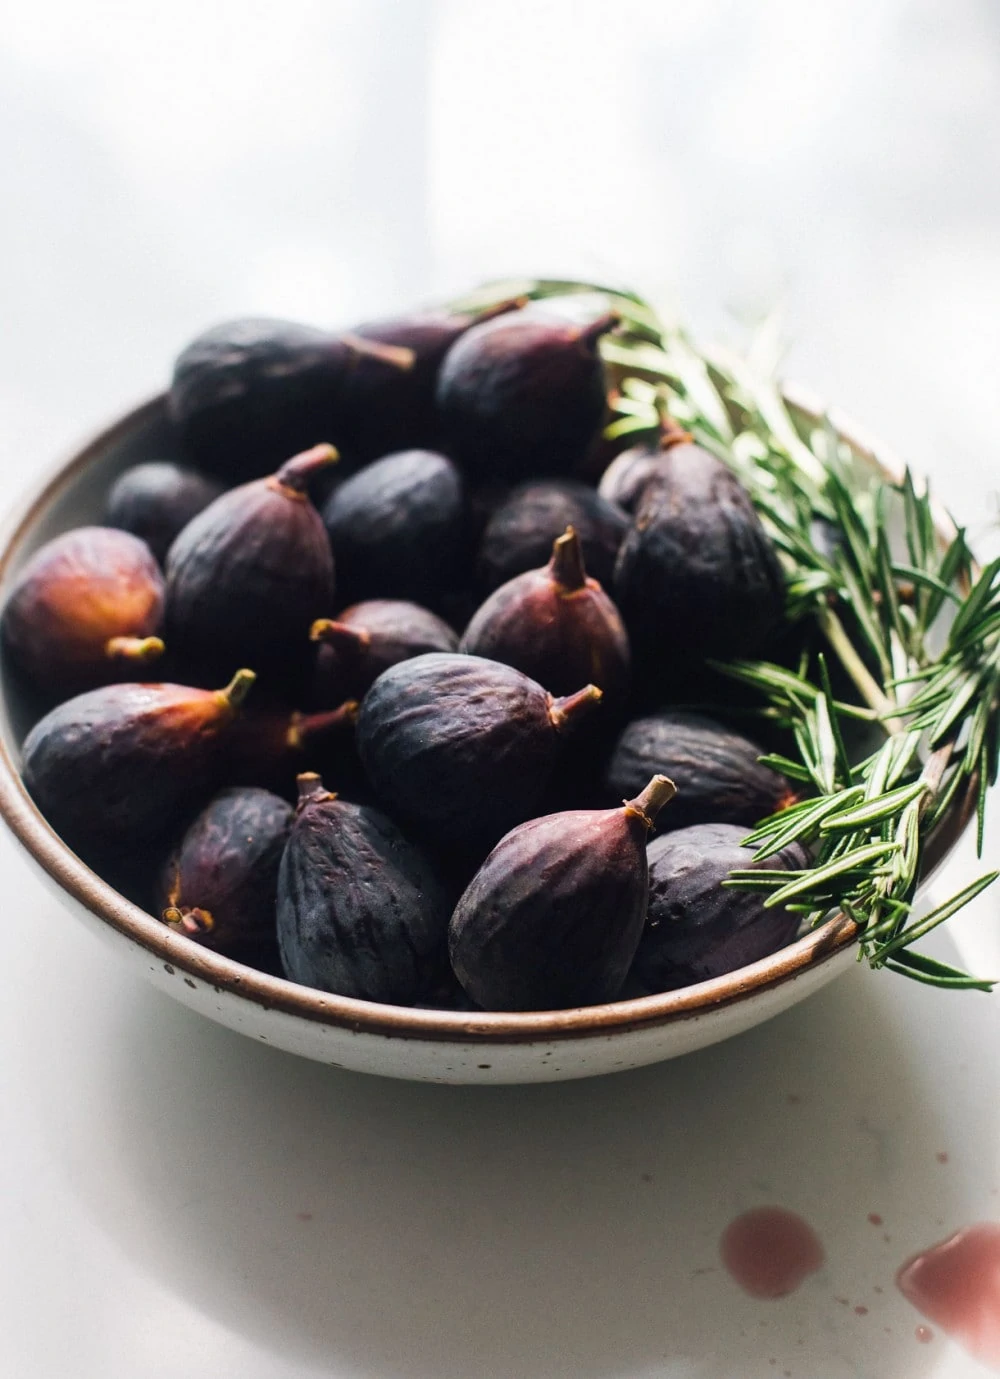 bowl of mission figs with rosemary sprigs sitting on the right side of bowl